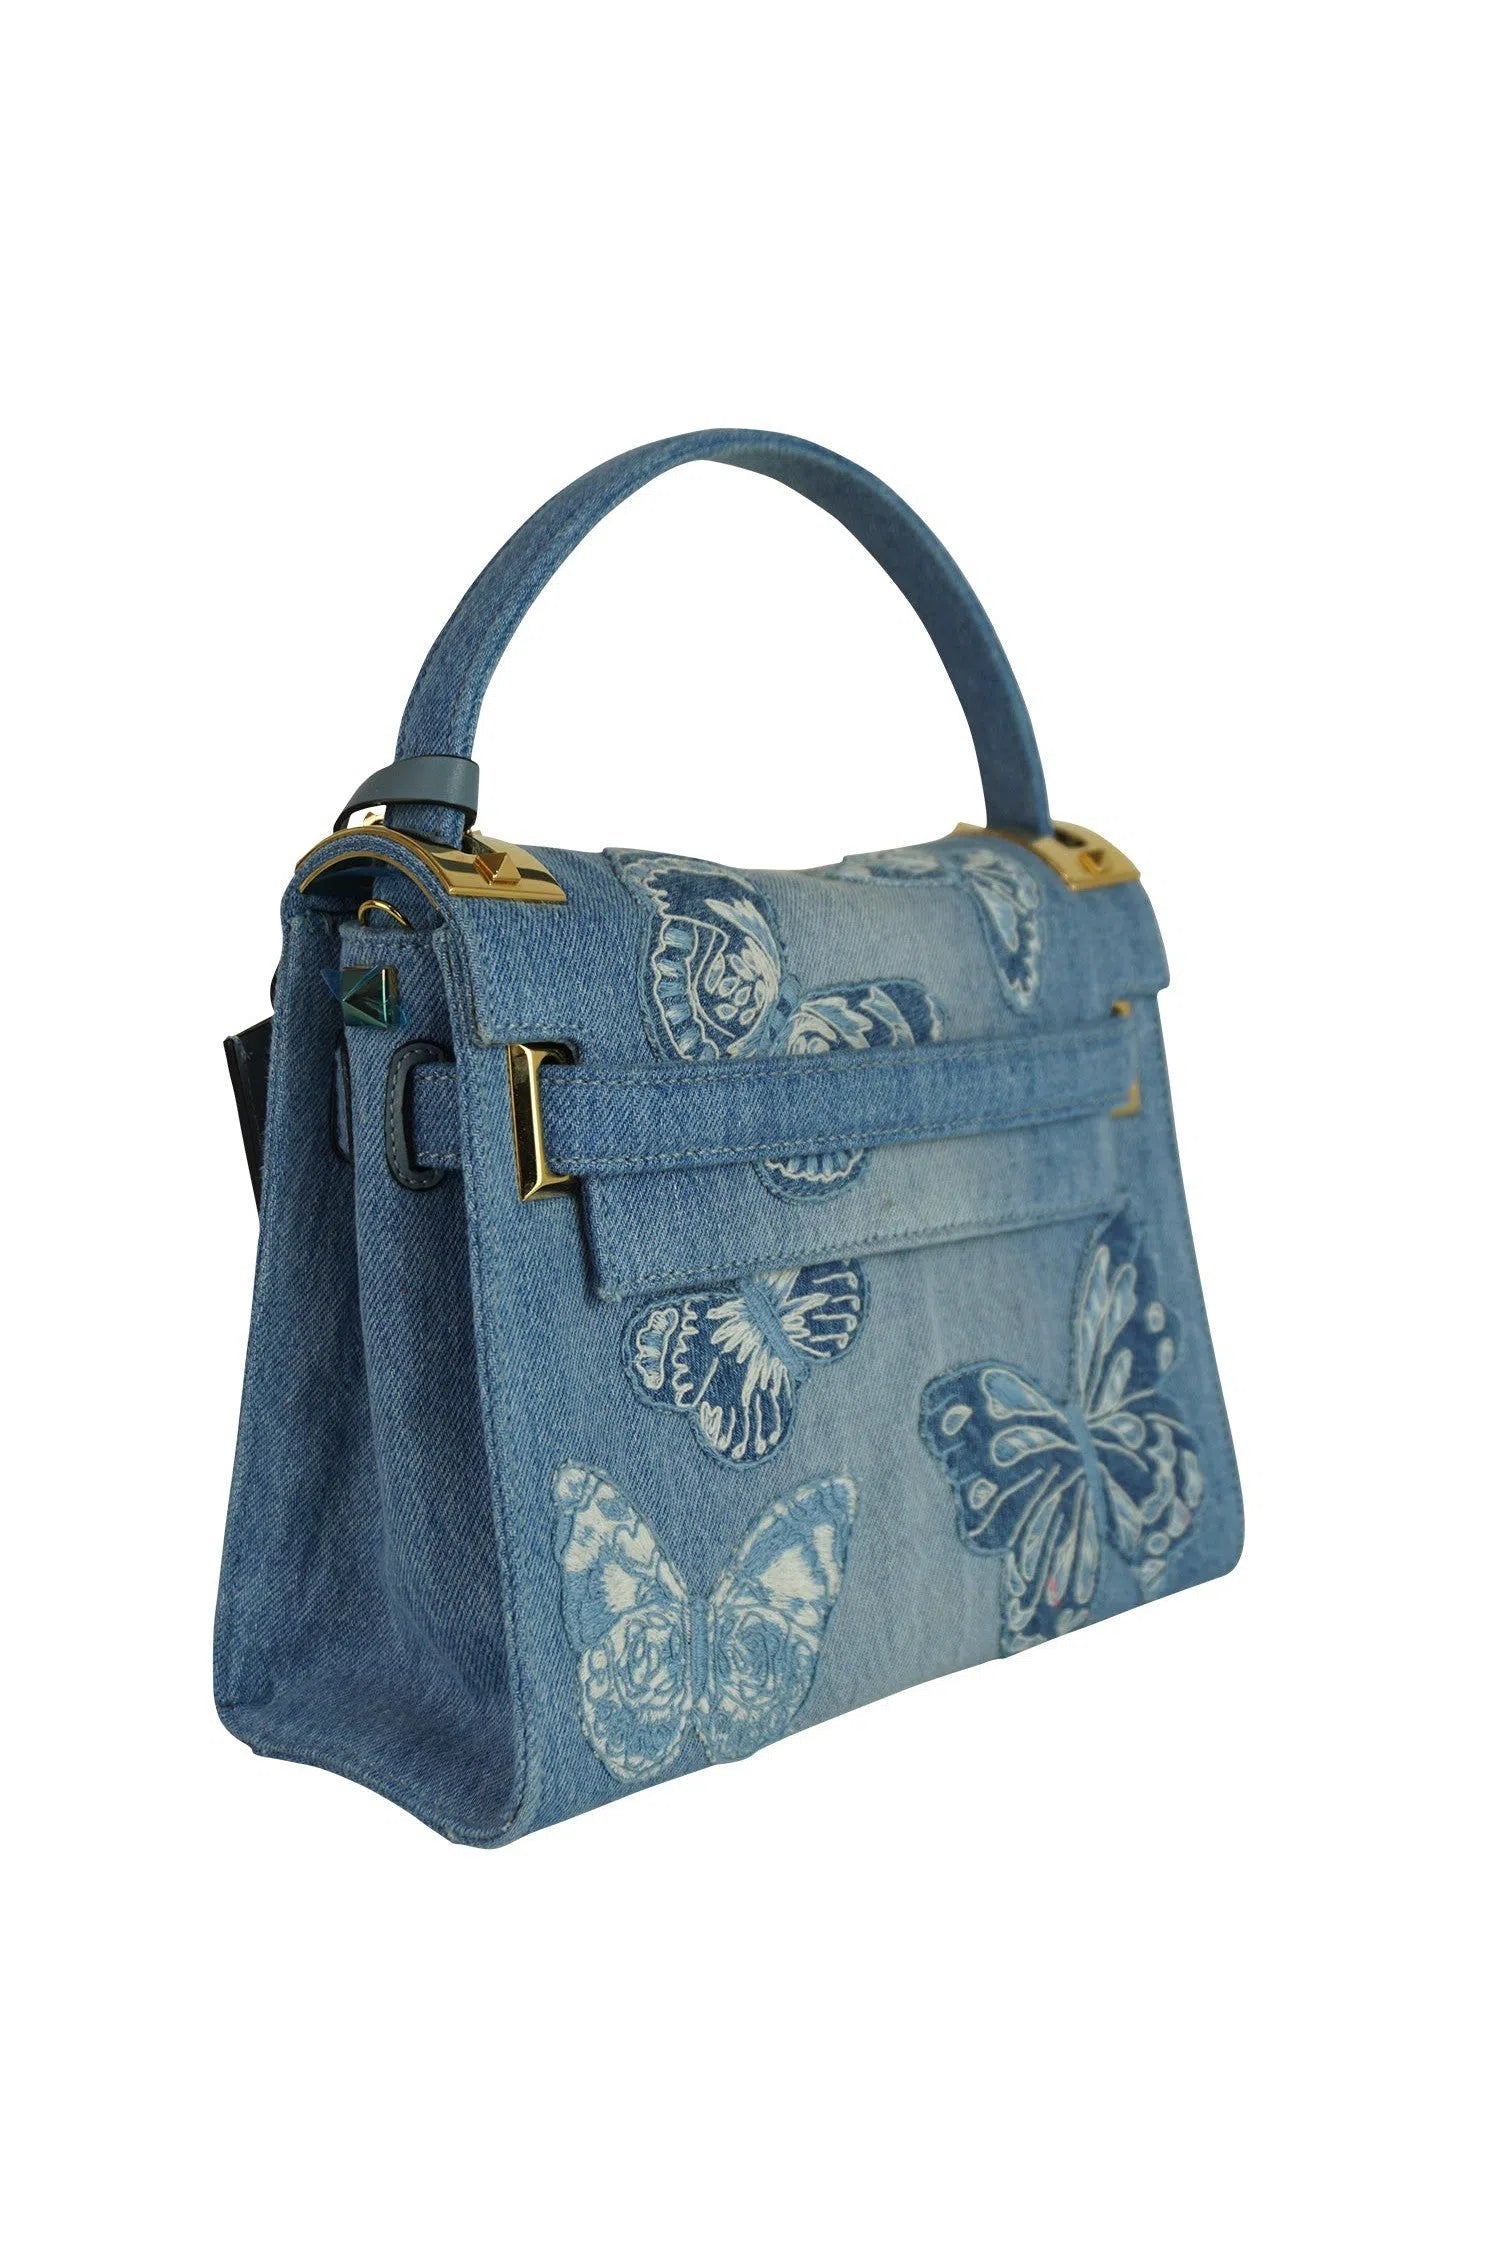 Valentino Denim Butterfly Top Handle Purse - Foxy Couture Carmel